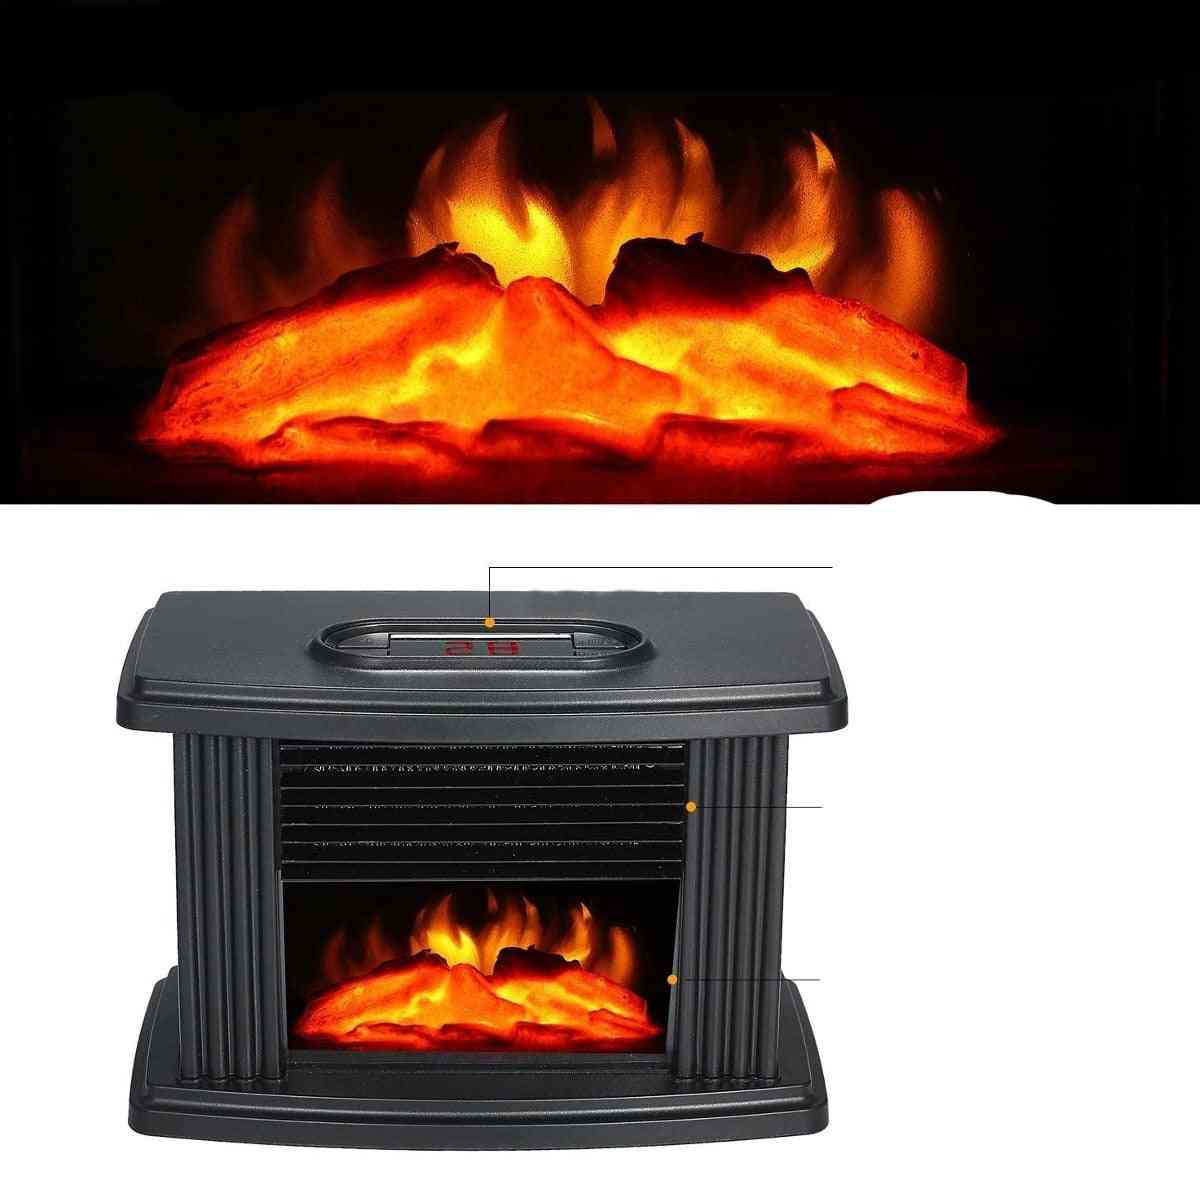 Portable Electric Fireplace Stove Heater Tabletop Indoor Space, 1000w Household Winter Heating Machine